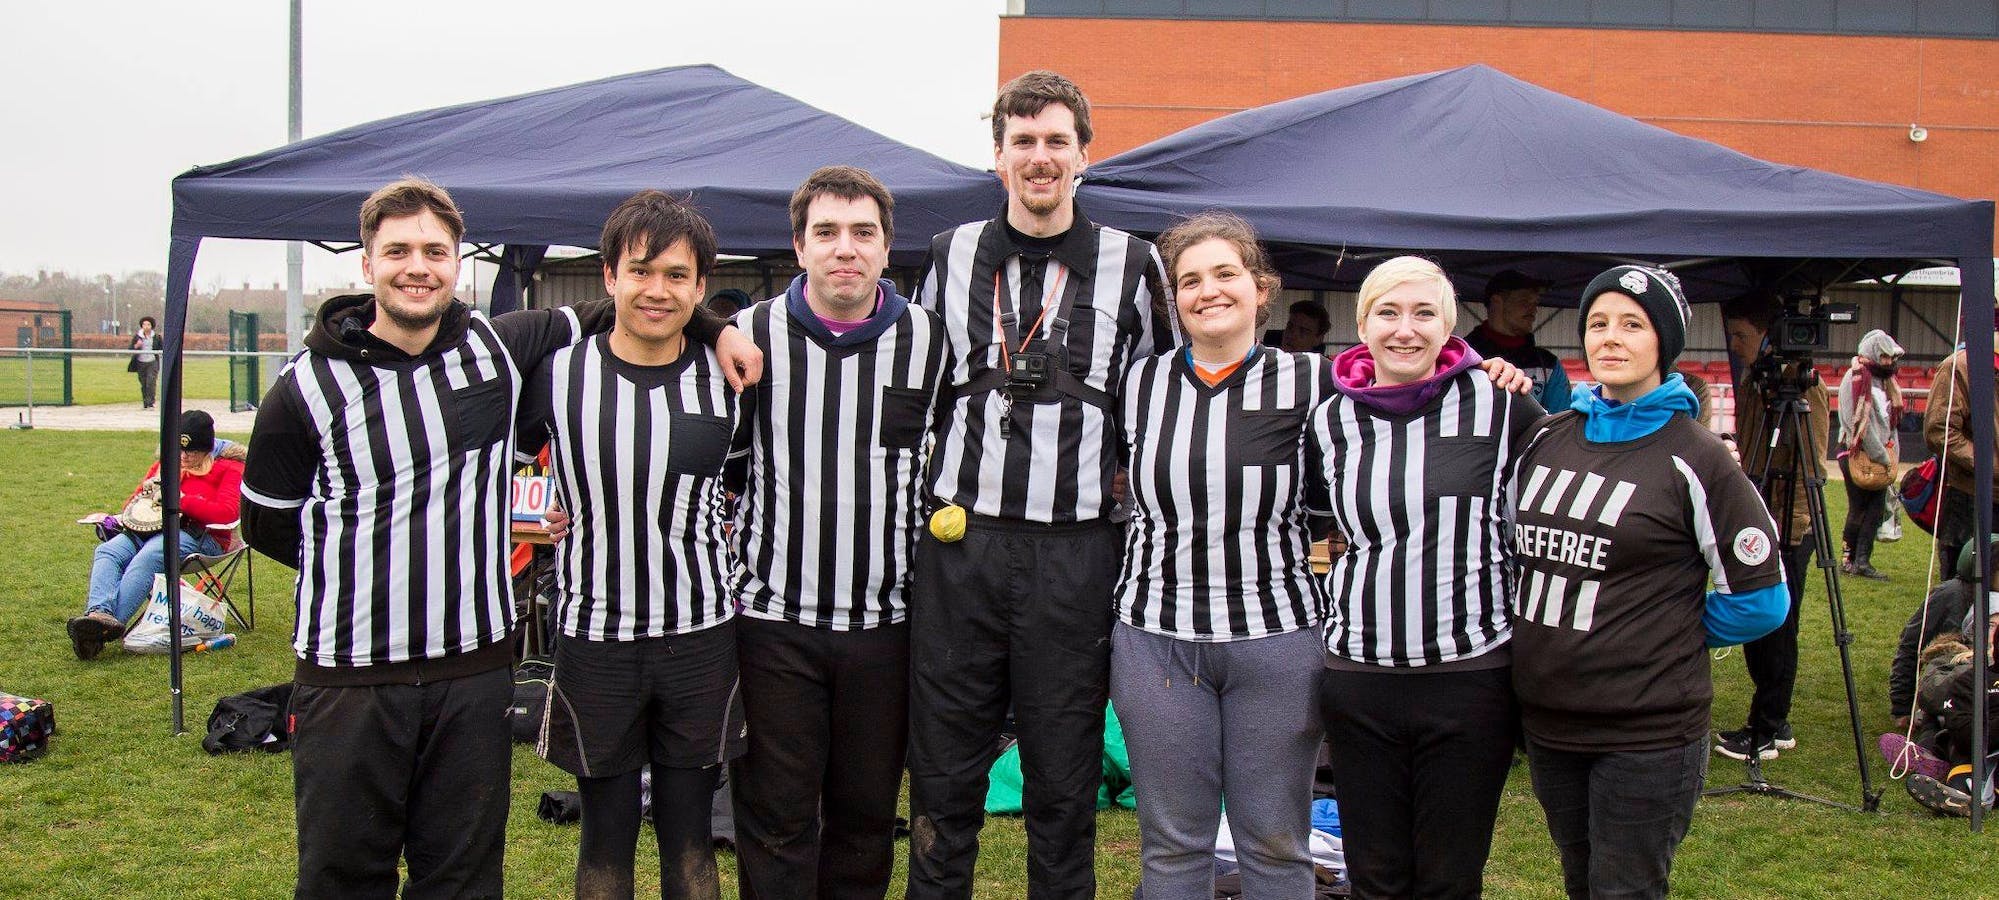 A ref team poses together before a match, all wearing their striped ref shirts